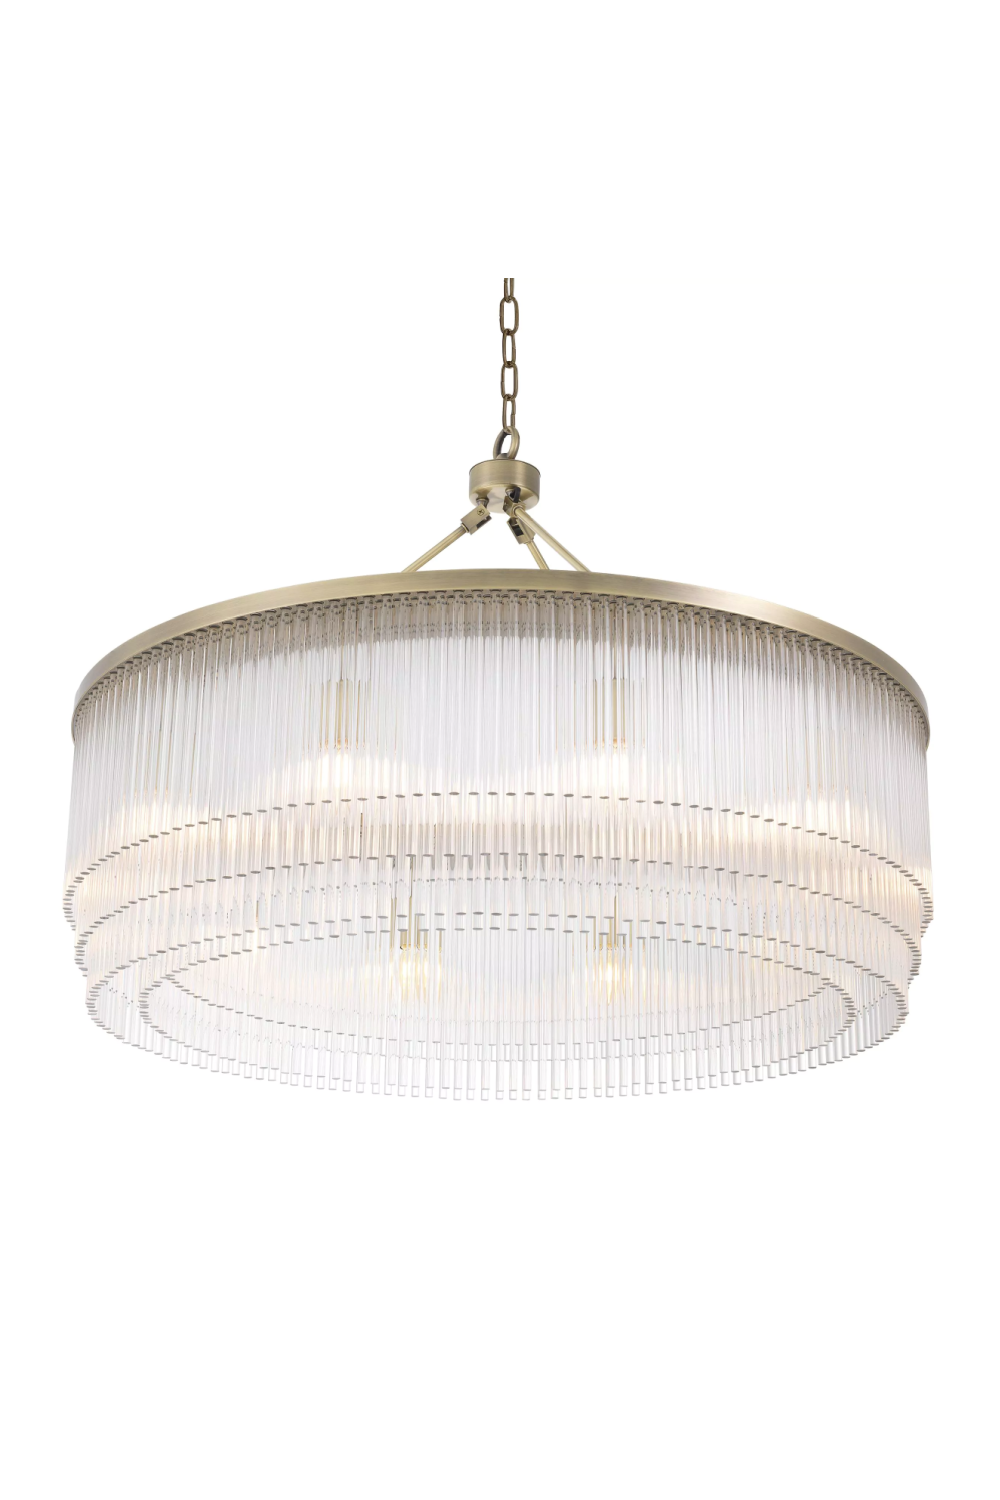 Glass Rods Contemporary Chandelier | Eichholtz Hector | OROA